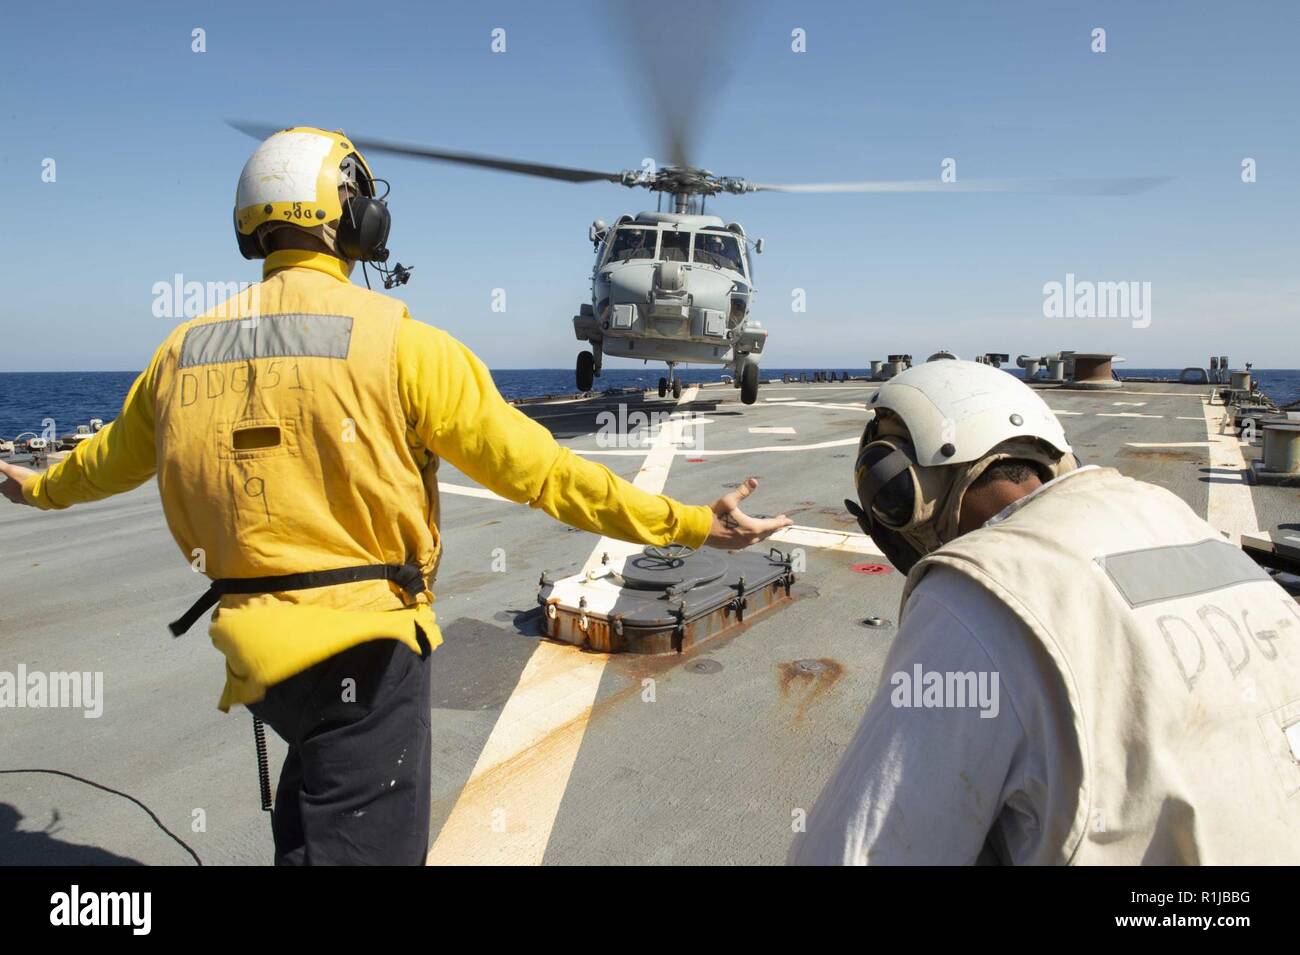 MEDITERRANEAN SEA (Oct. 4, 2018) Boatswain’s Mate 3rd Class Alexander Stiffler, left, directs a MH-60R Sea Hawk, assigned to the “Vipers” of Helicopter Maritime Strike Squadron (HSM) 48 aboard the Arleigh Burke-class guided-missile destroyer USS Arleigh Burke (DDG 51) in the Mediterranean Sea Oct. 4, 2018. Arleigh Burke, homeported at Naval Station Norfolk, is conducting naval operations in the U.S. 6th Fleet area of operations in support of U.S. national security interests in Europe and Africa. Stock Photo